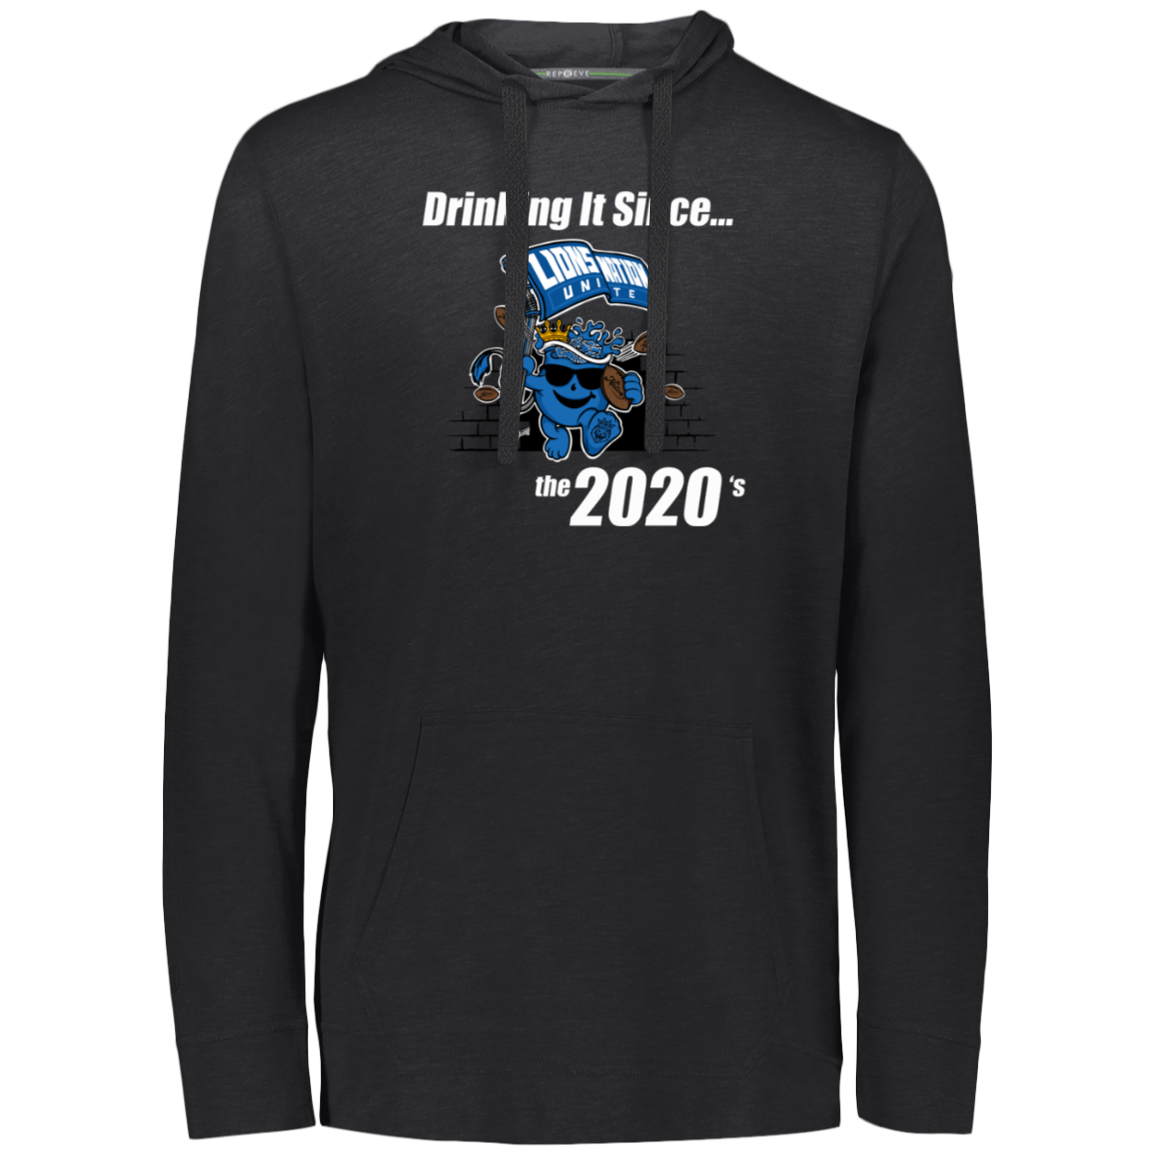 Drinking It Since the 2020's Men's T-Shirt Hoodie